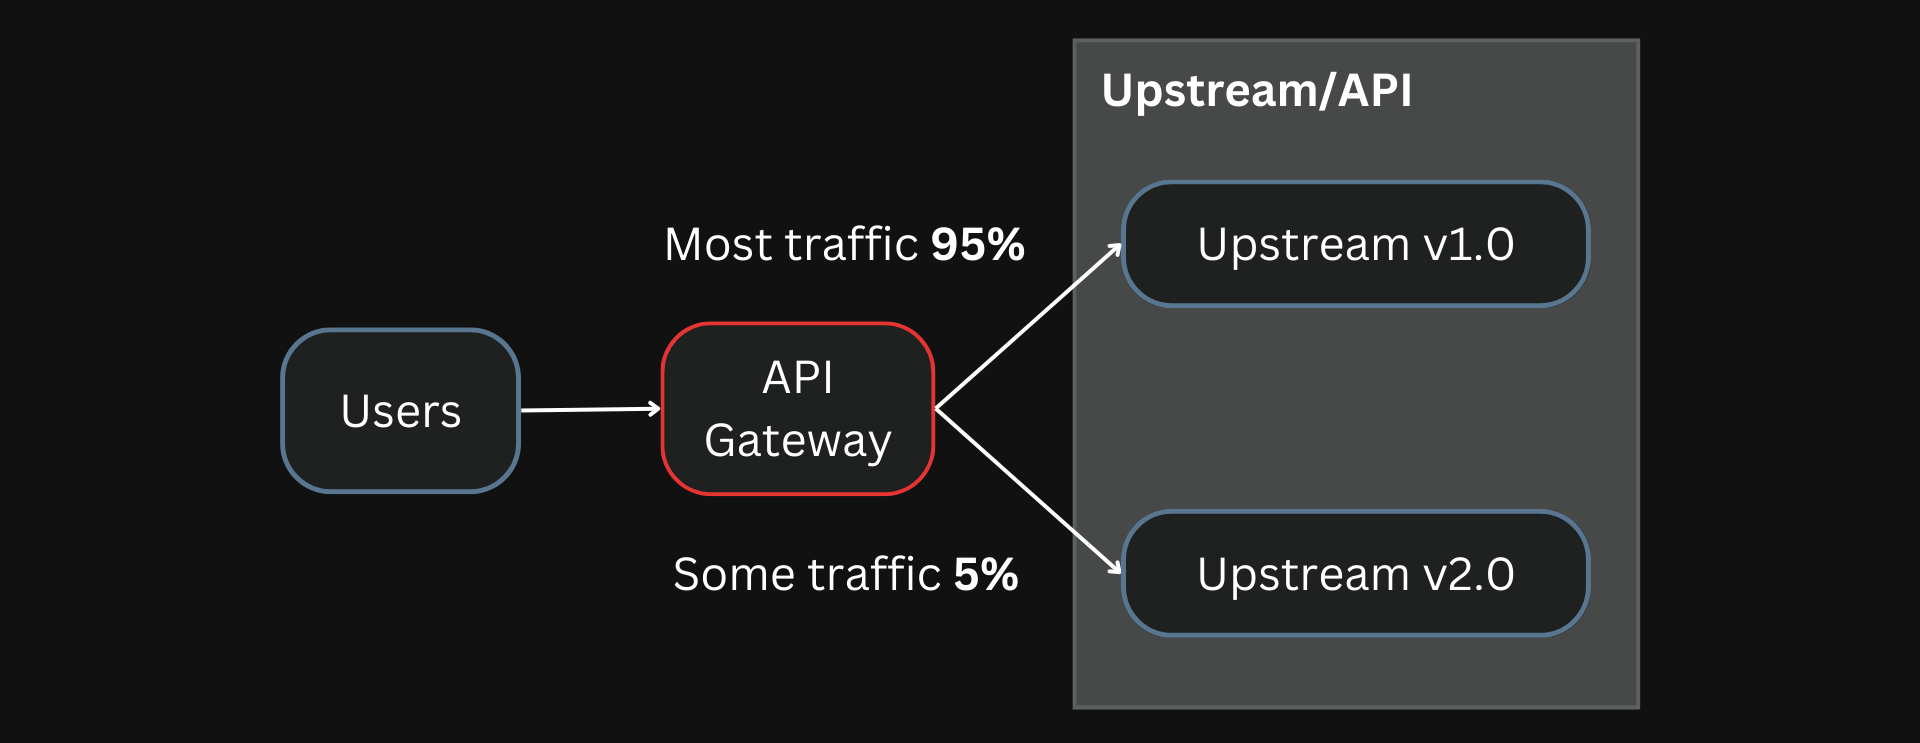 Route some traffic to the new API version